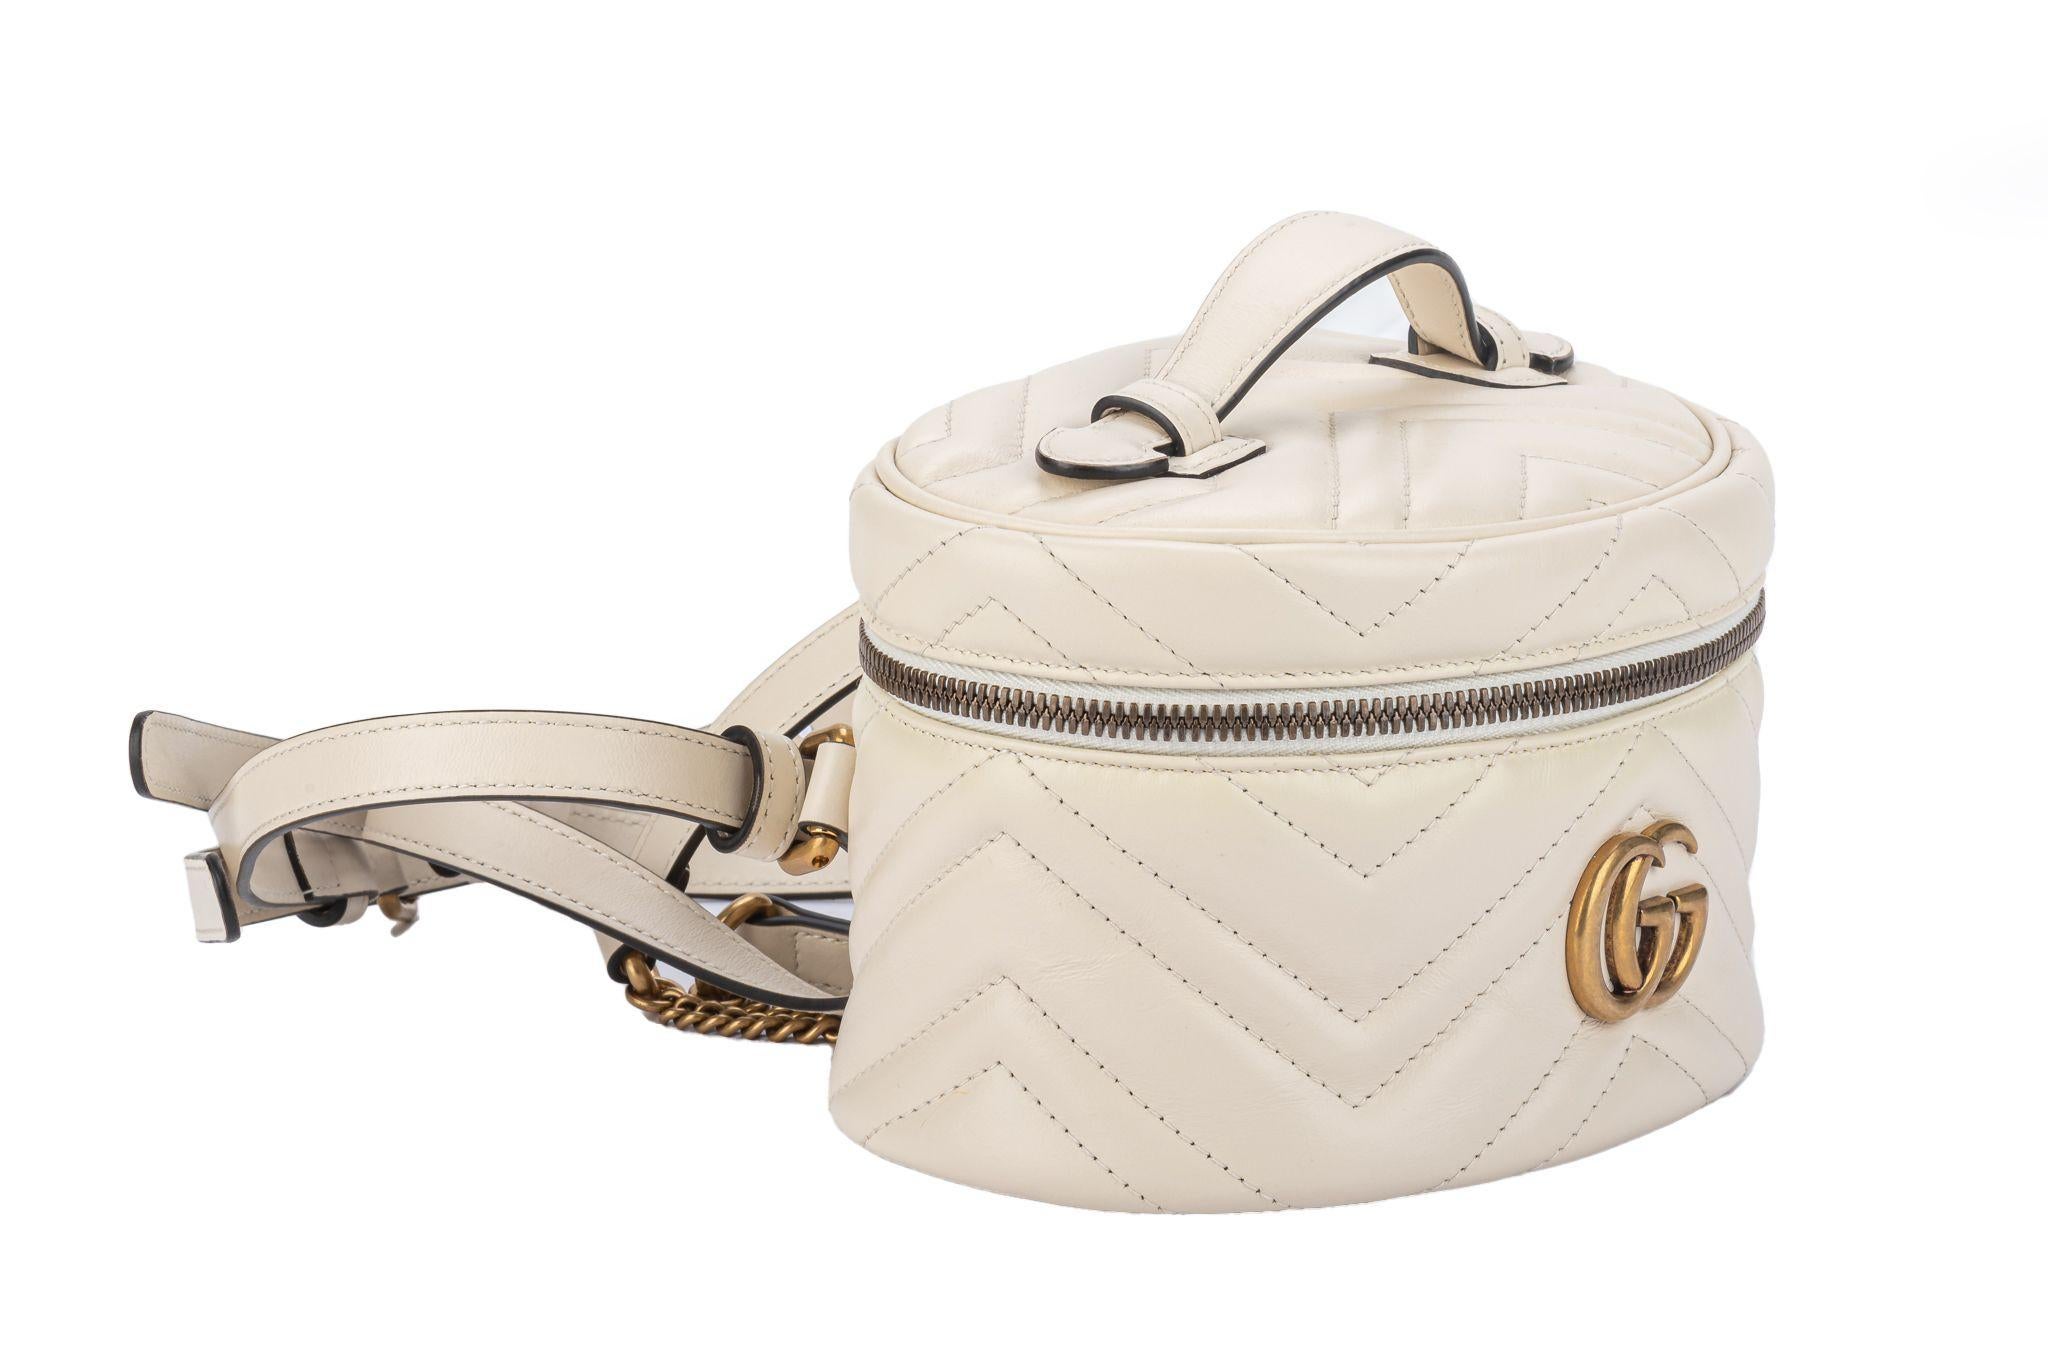 Gucci new mini Marmont backpack in cream leather with bronze hardware. Top handle, adjustable straps and original dust cover. Fits a phone.